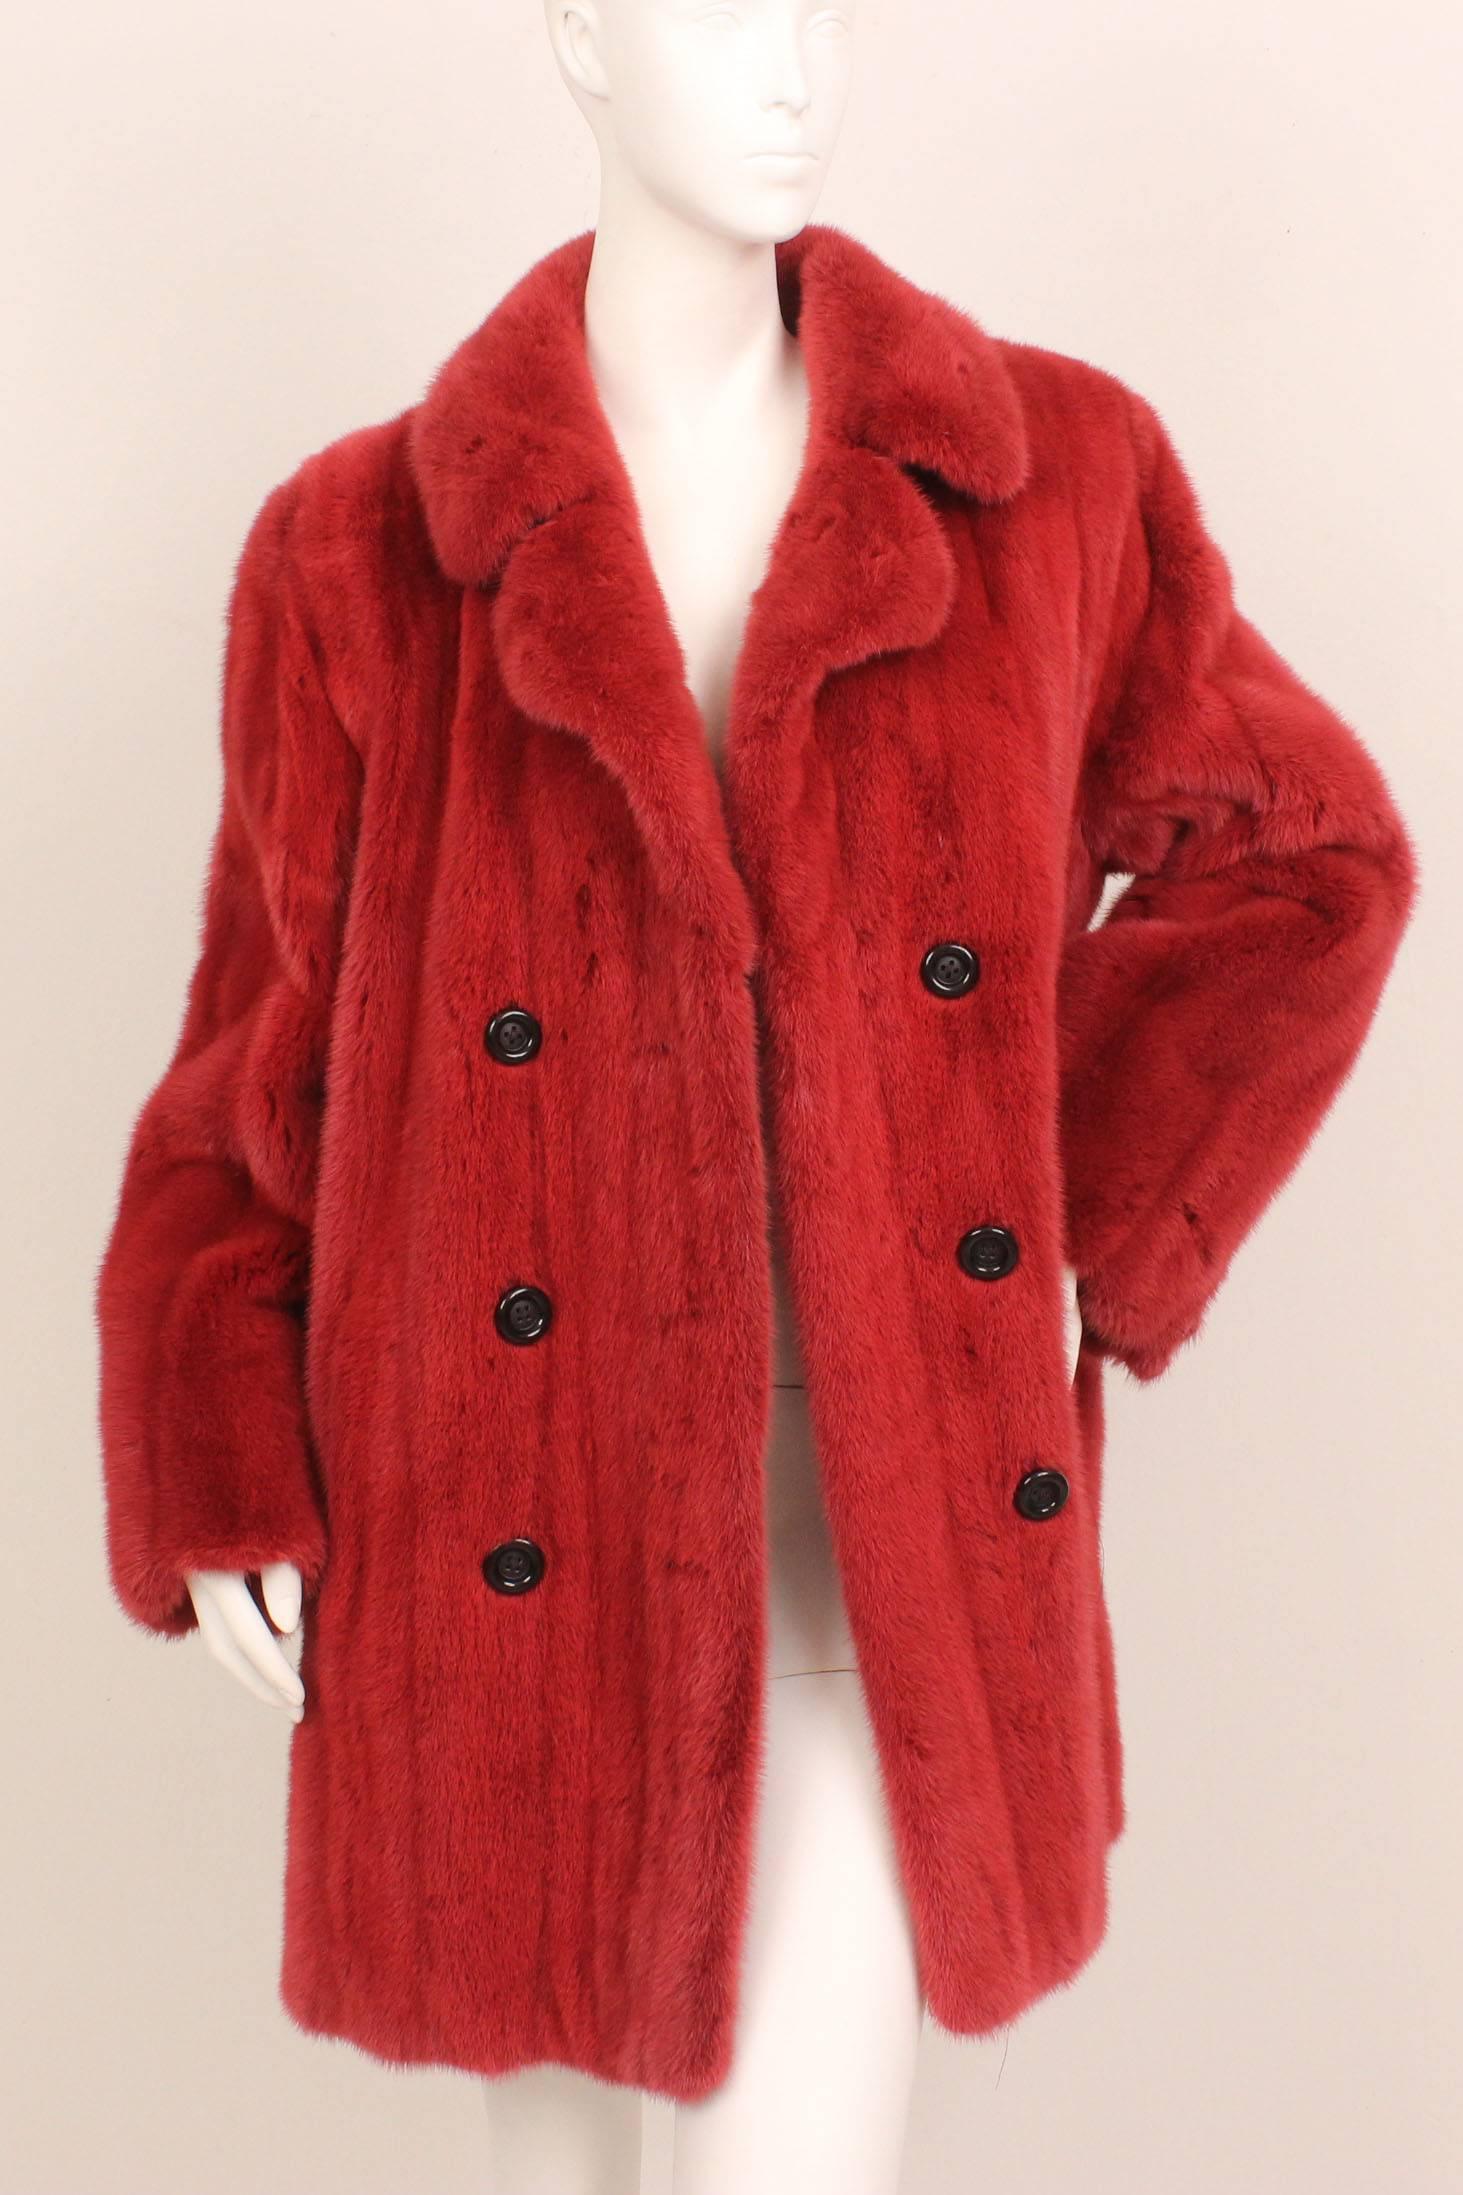 This lovely mink by Ben Kahn is a wonderful addition to any winter wardrobe.  The fur has been dyed a sumptious shade of red. The styling is contemporary along the lines of a peacoat.  It is double breasted with two rows of black buttons down the